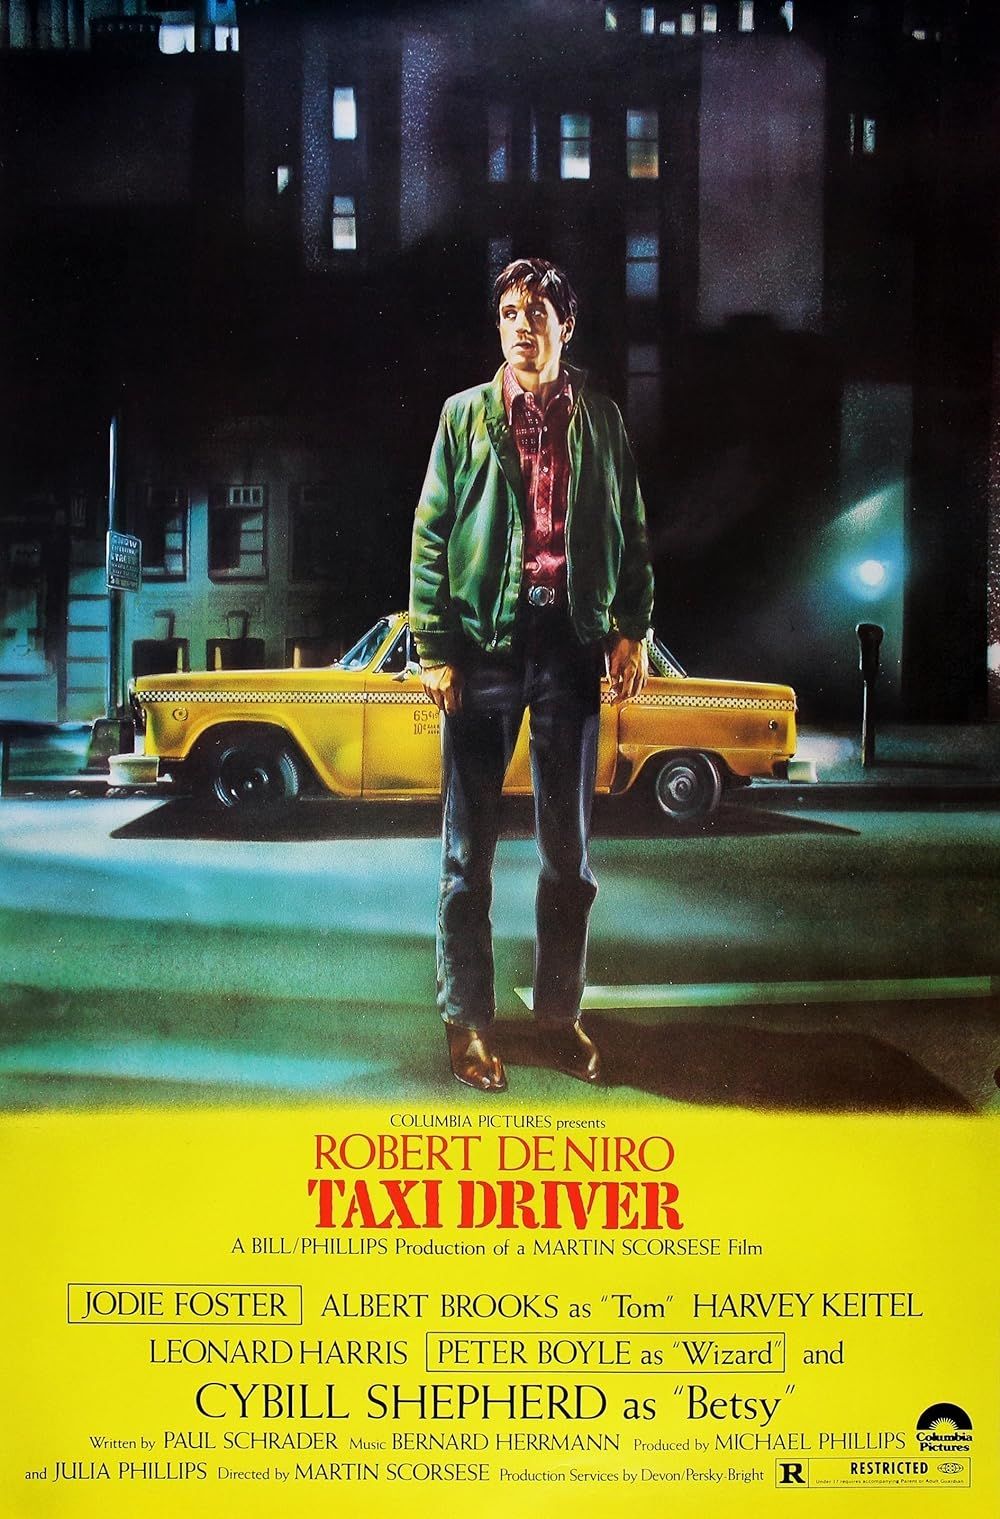 Robert DeNiro standing in a street on the cover for the Taxi Driver poster